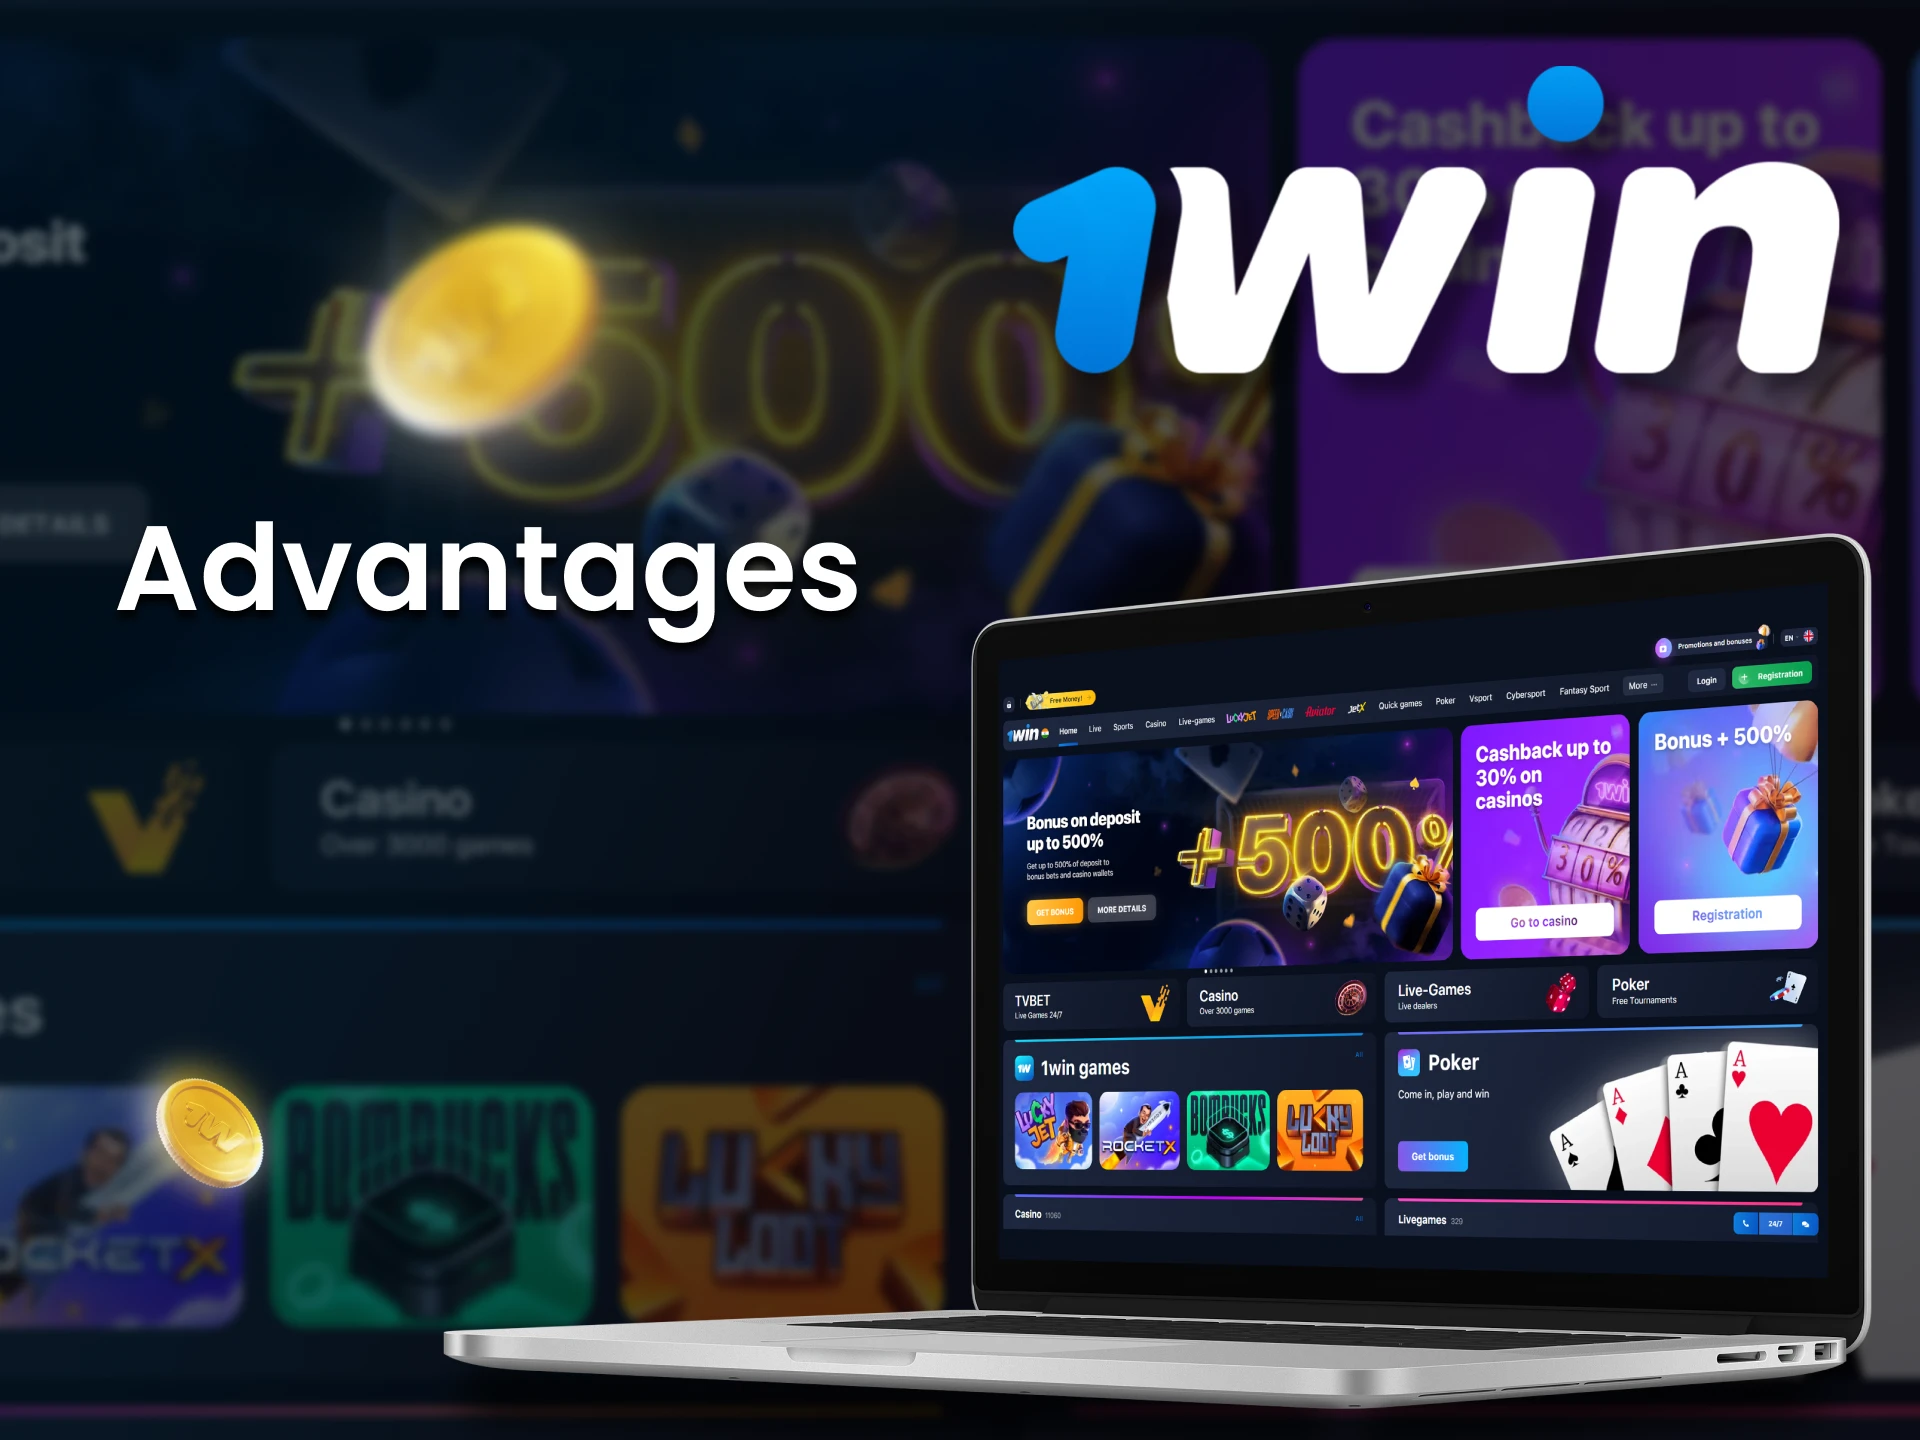 Find out about the benefits of the 1win PC app.